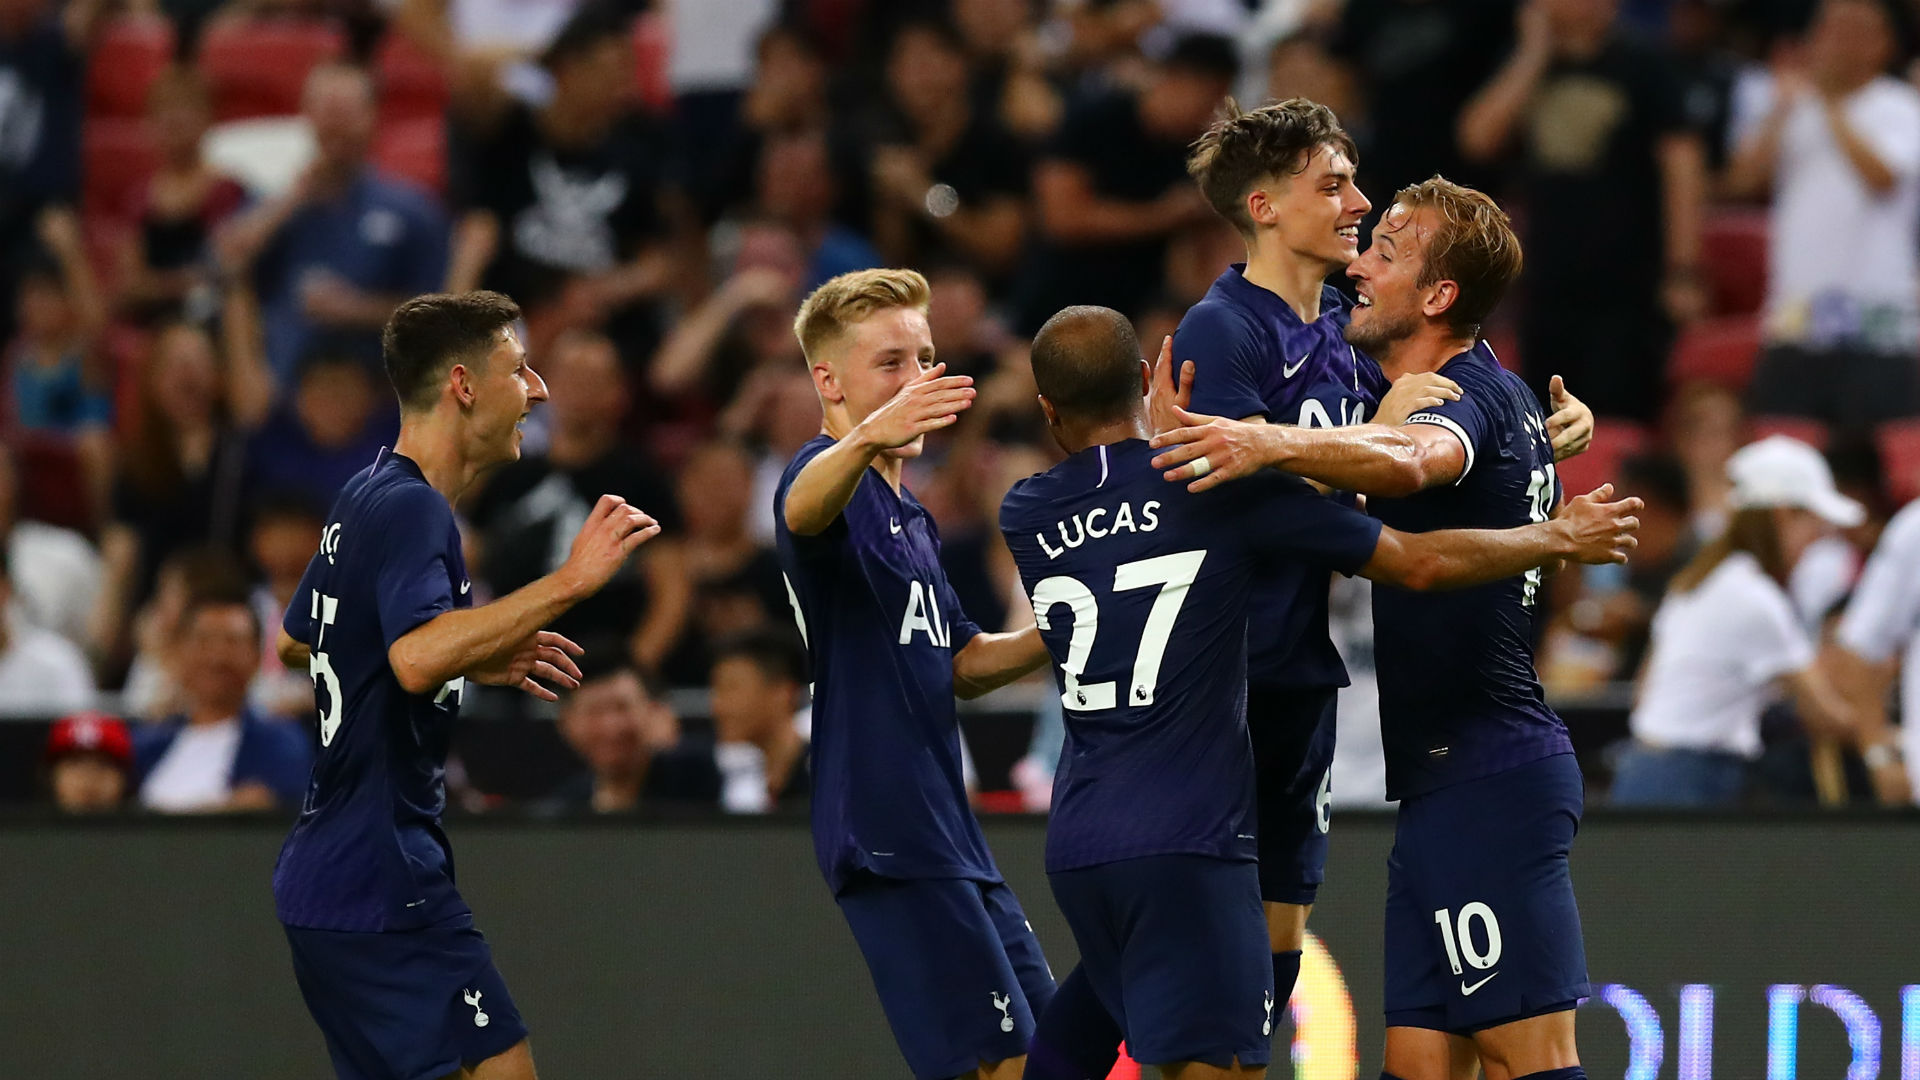 Tottenham sealed a 3-2 International Champions Cup victory over Juventus thanks to Harry Kane's stunning goal from the halfway line.